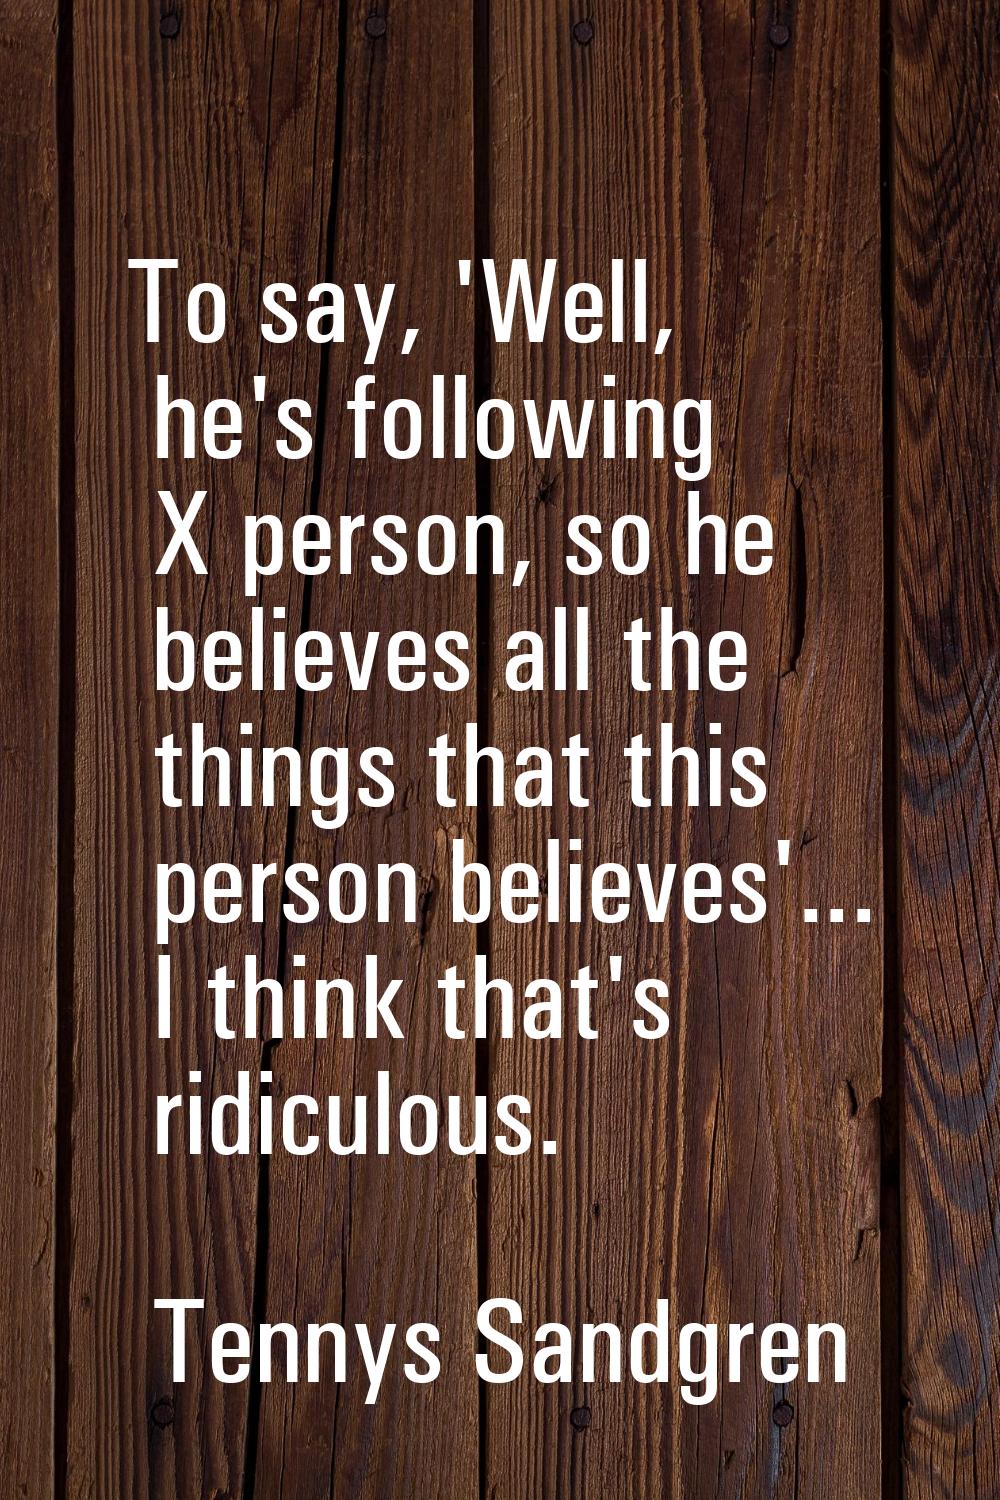 To say, 'Well, he's following X person, so he believes all the things that this person believes'...